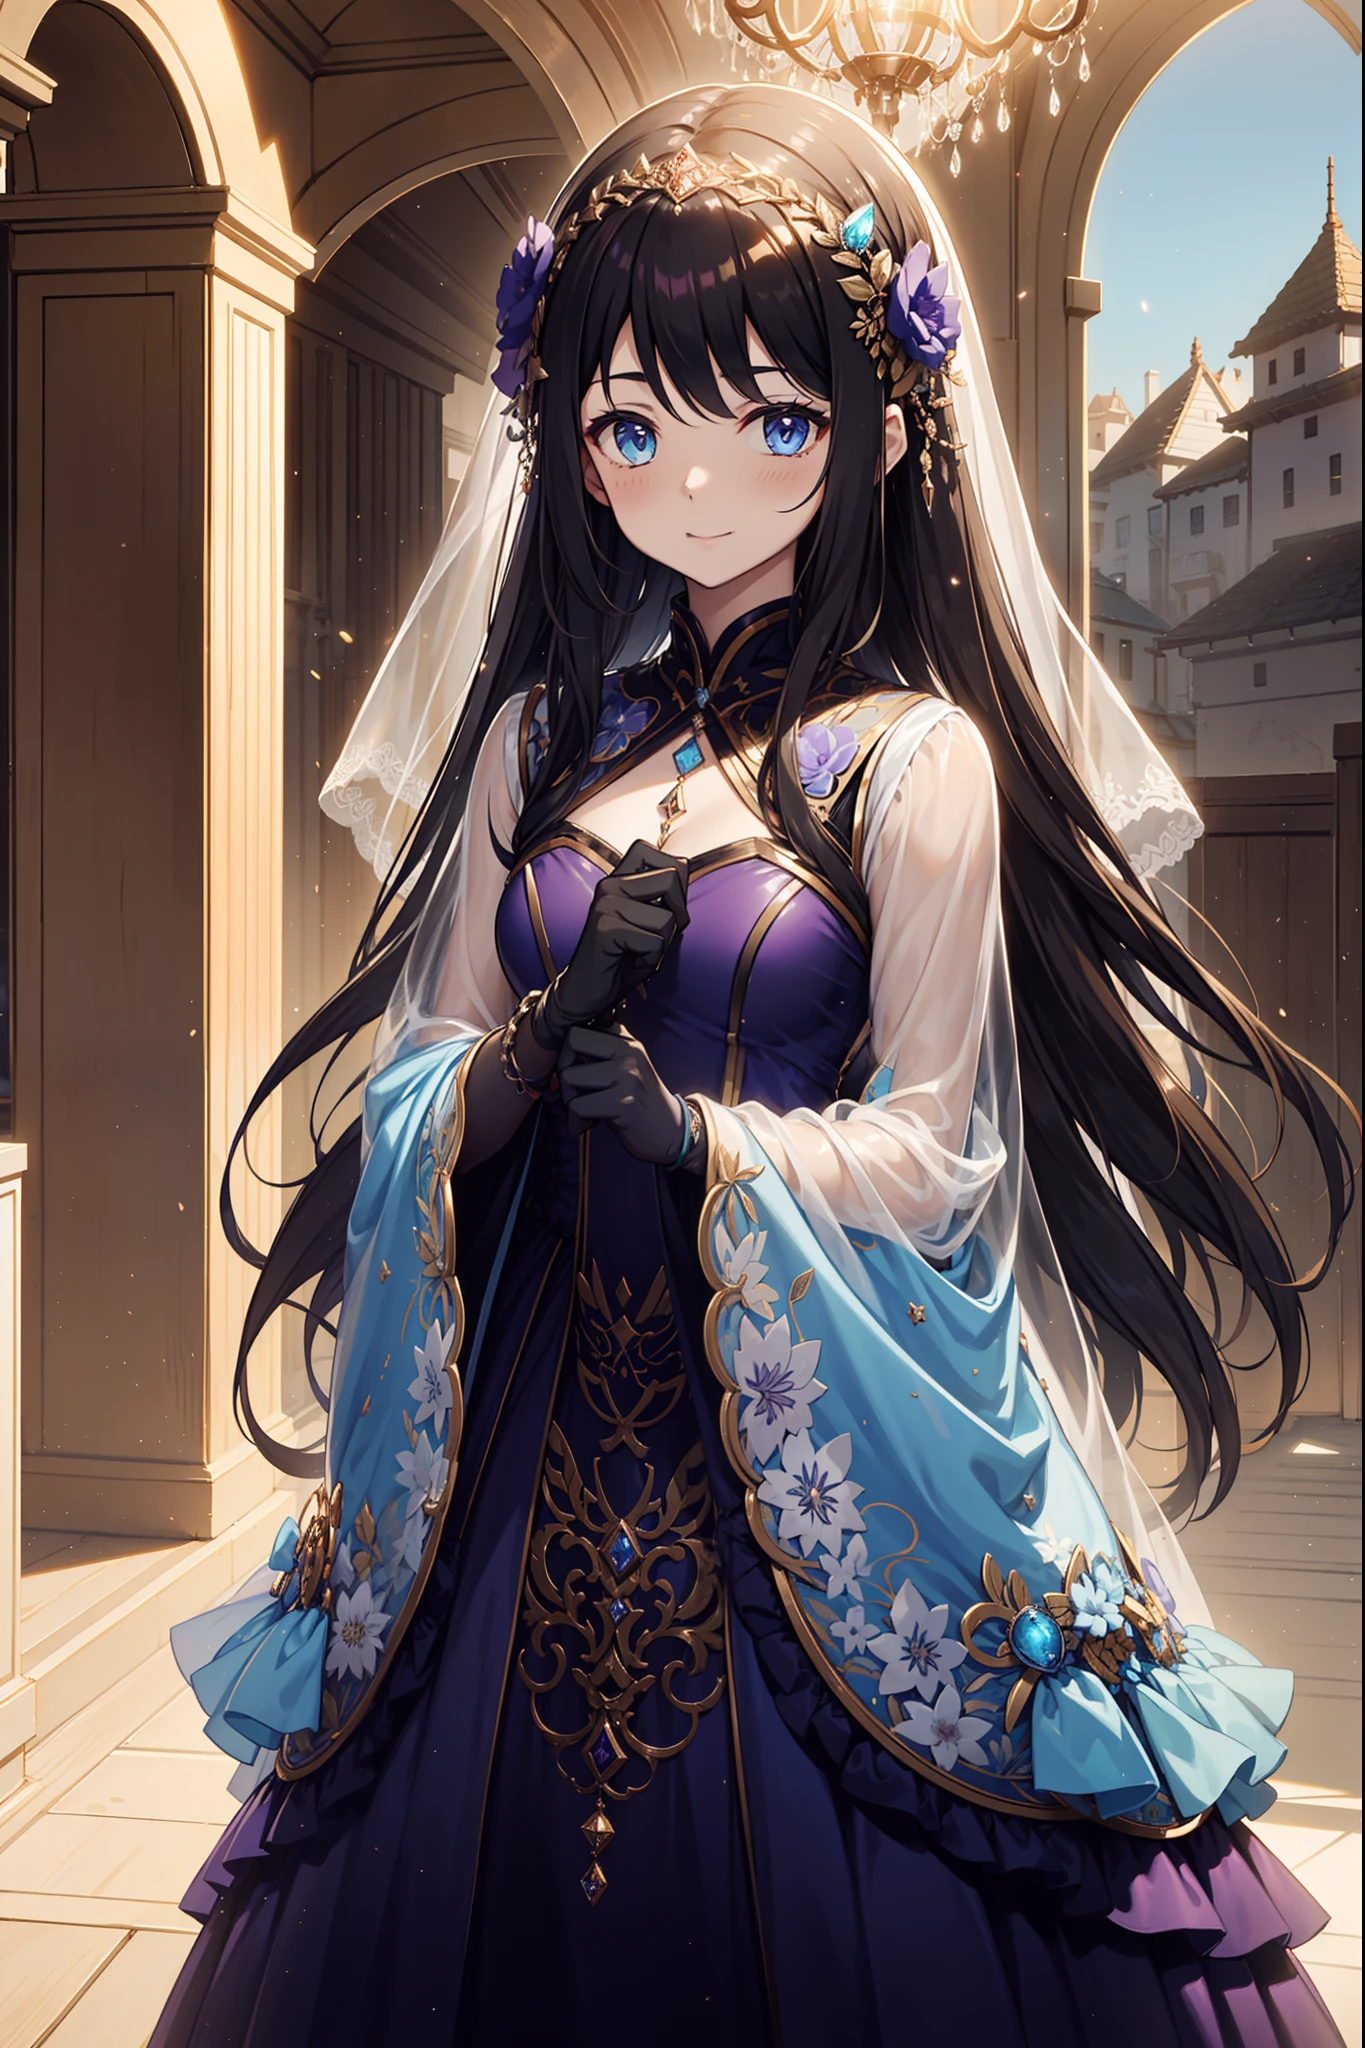 teens girl，Enchanted，having fun，Being in love，Dark black princess dress，Lilac cloth，see-through transparent clothes，exquisite costumes，A small amount of lace，Pattern，Splendid Hall，solo person，blond hairbl，pale blue color eyes，the night